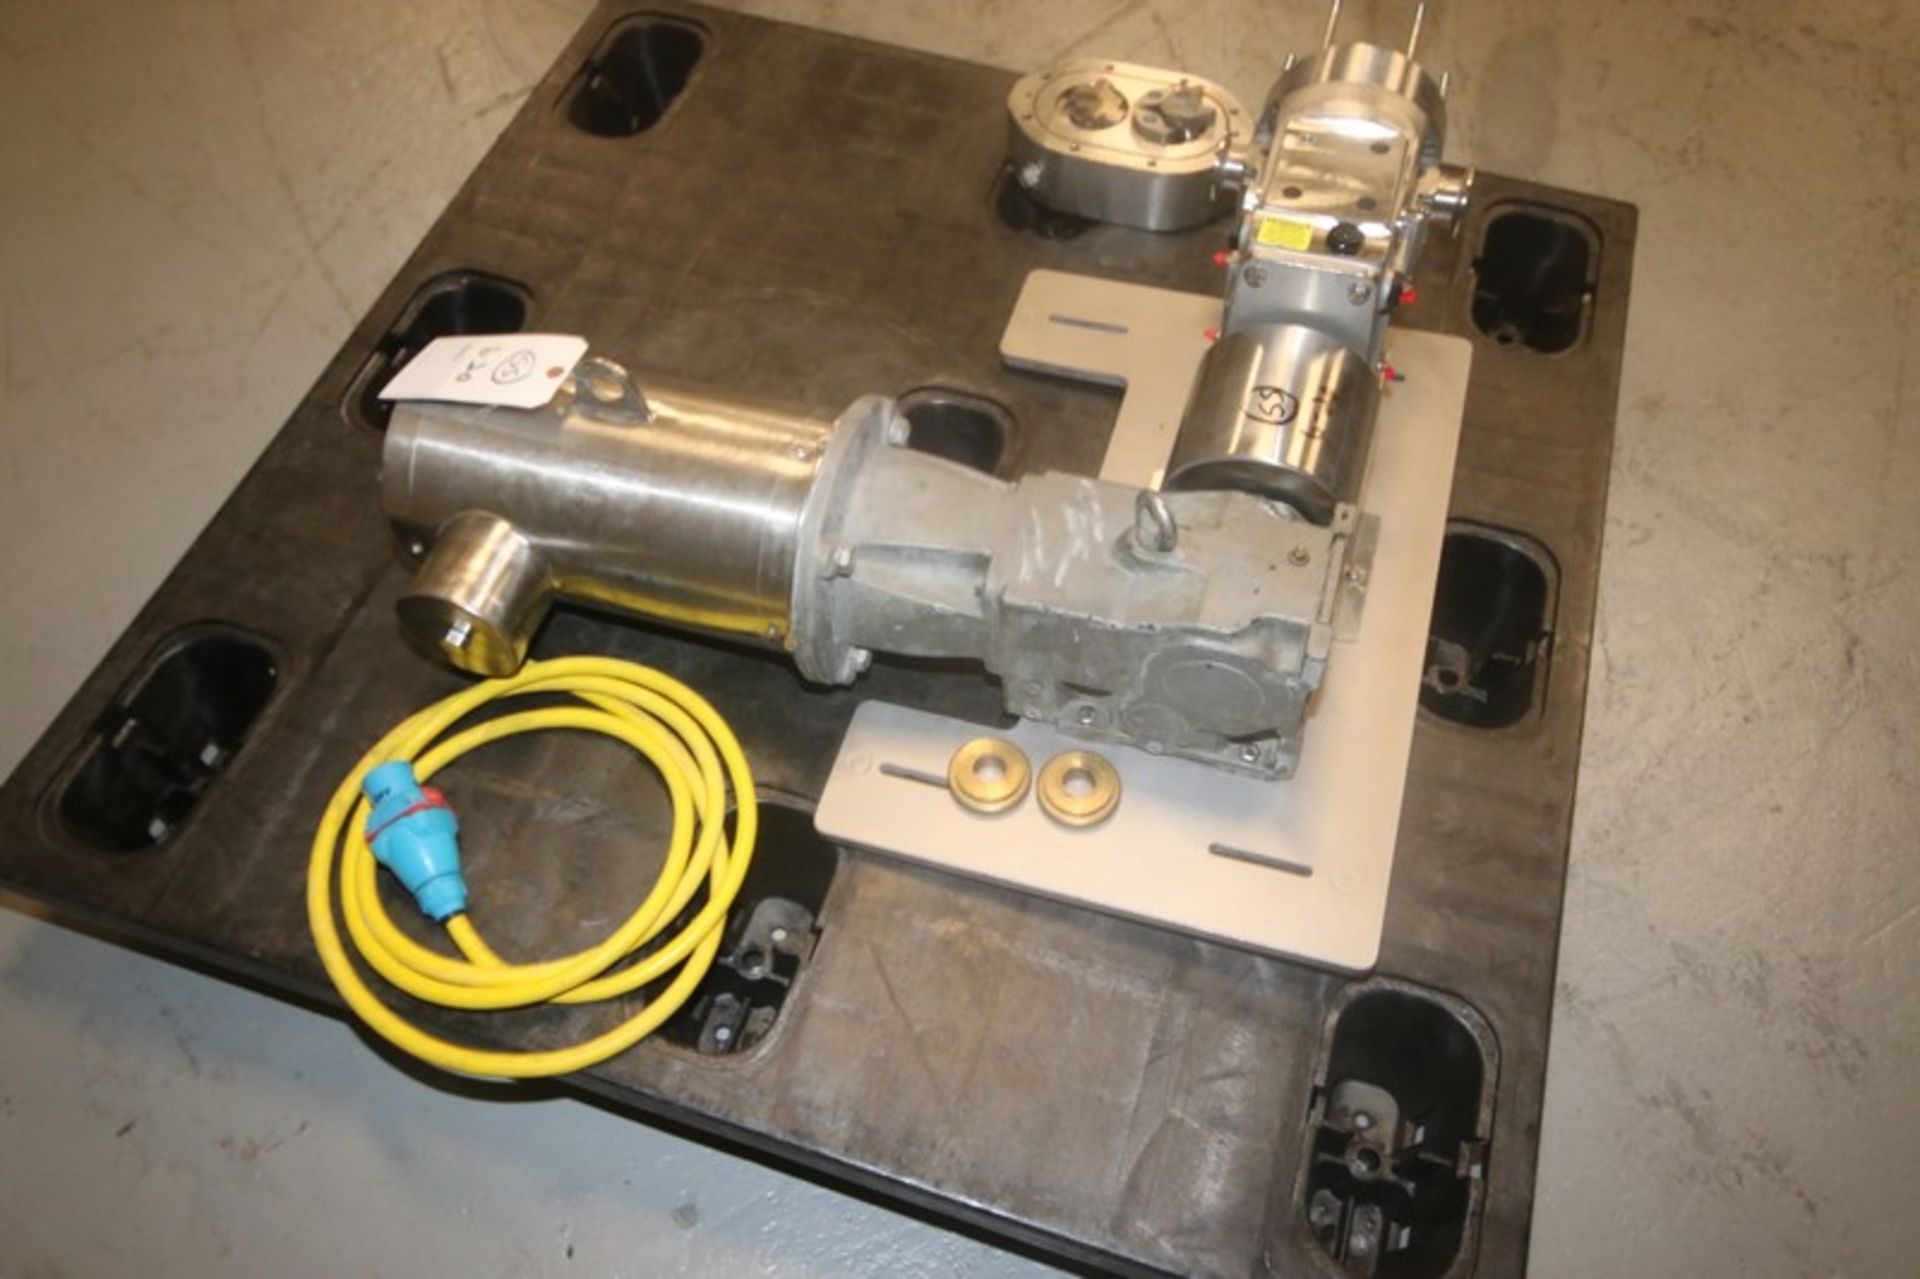 Ampco 3 hp S/S Positive Displacement Pump, M/N ZP1+030-S0, S/N 1934541-10-1, with Baldor 1750 RPM - Image 9 of 14